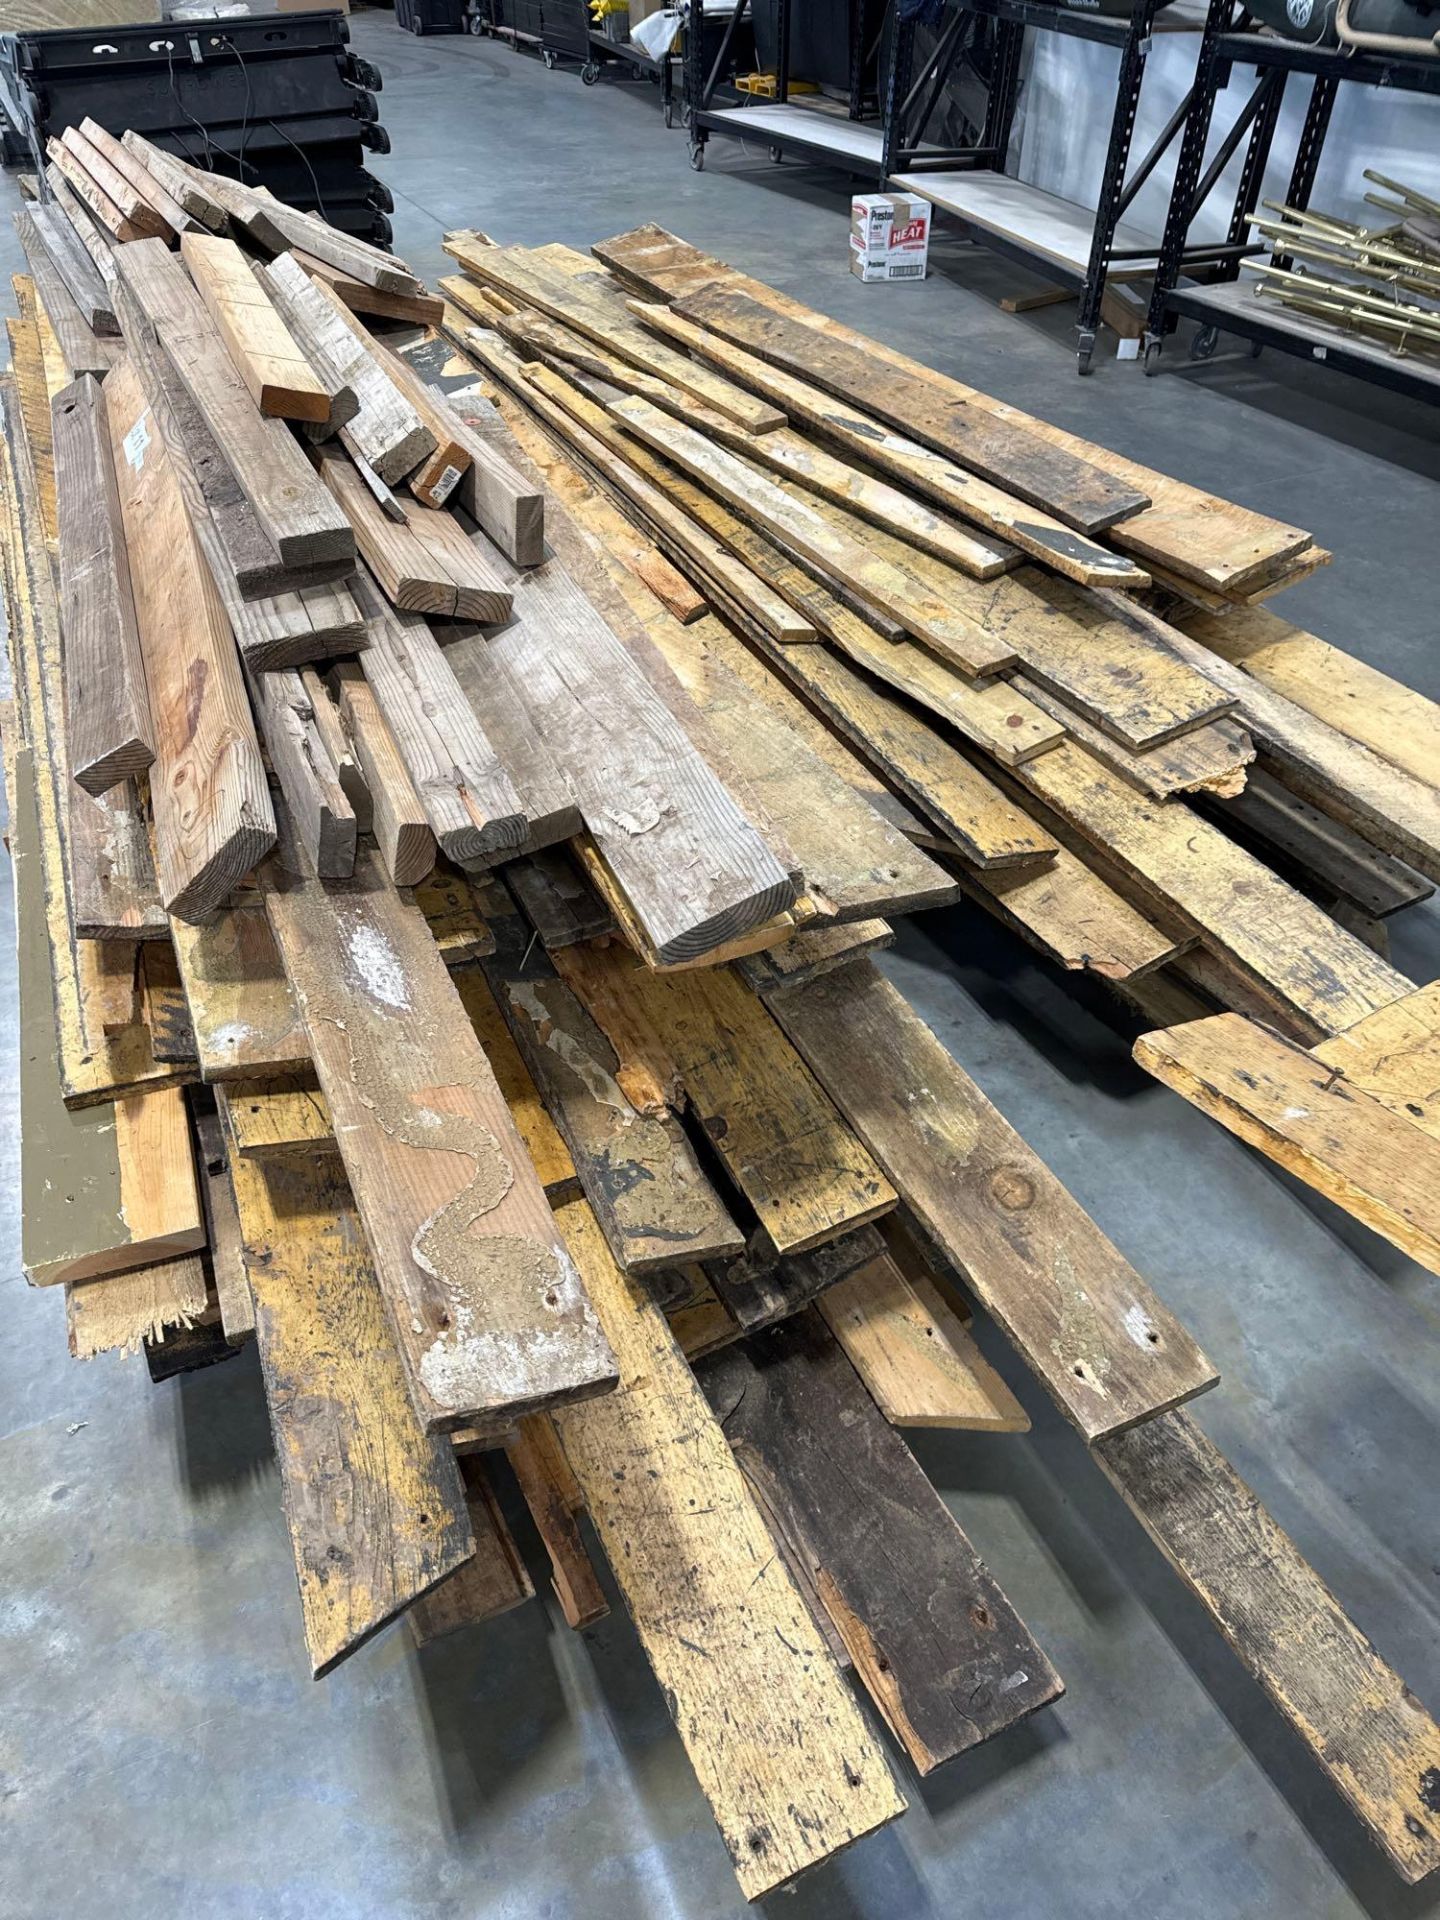 Two stacks of Reclaimed flooring from claim jumper steak house - Image 2 of 5